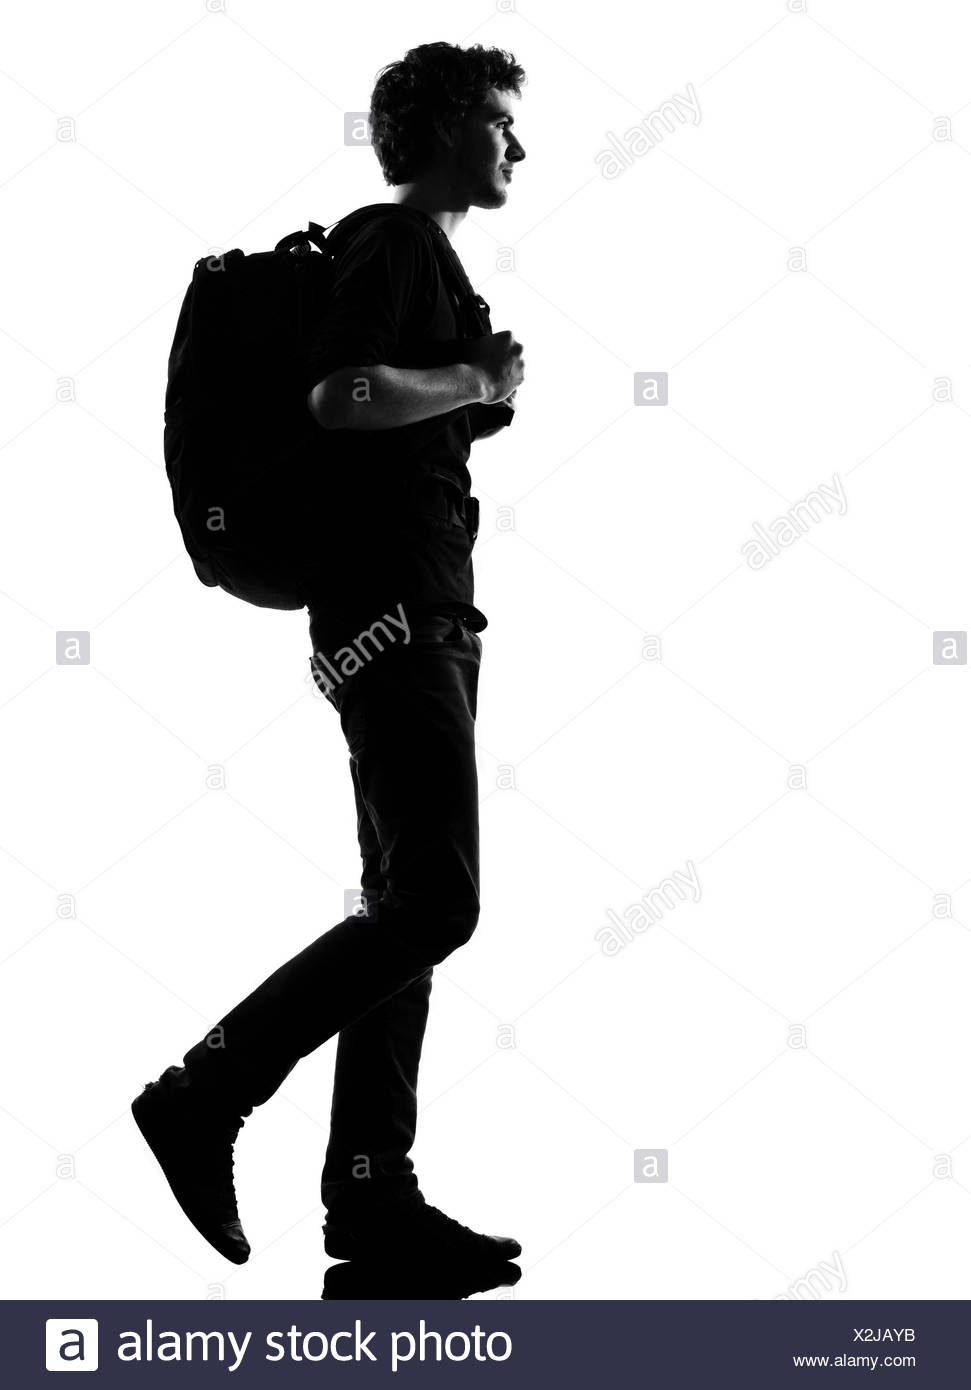 Young Man Backpacker Walking Silhouette In Studio Isolated On